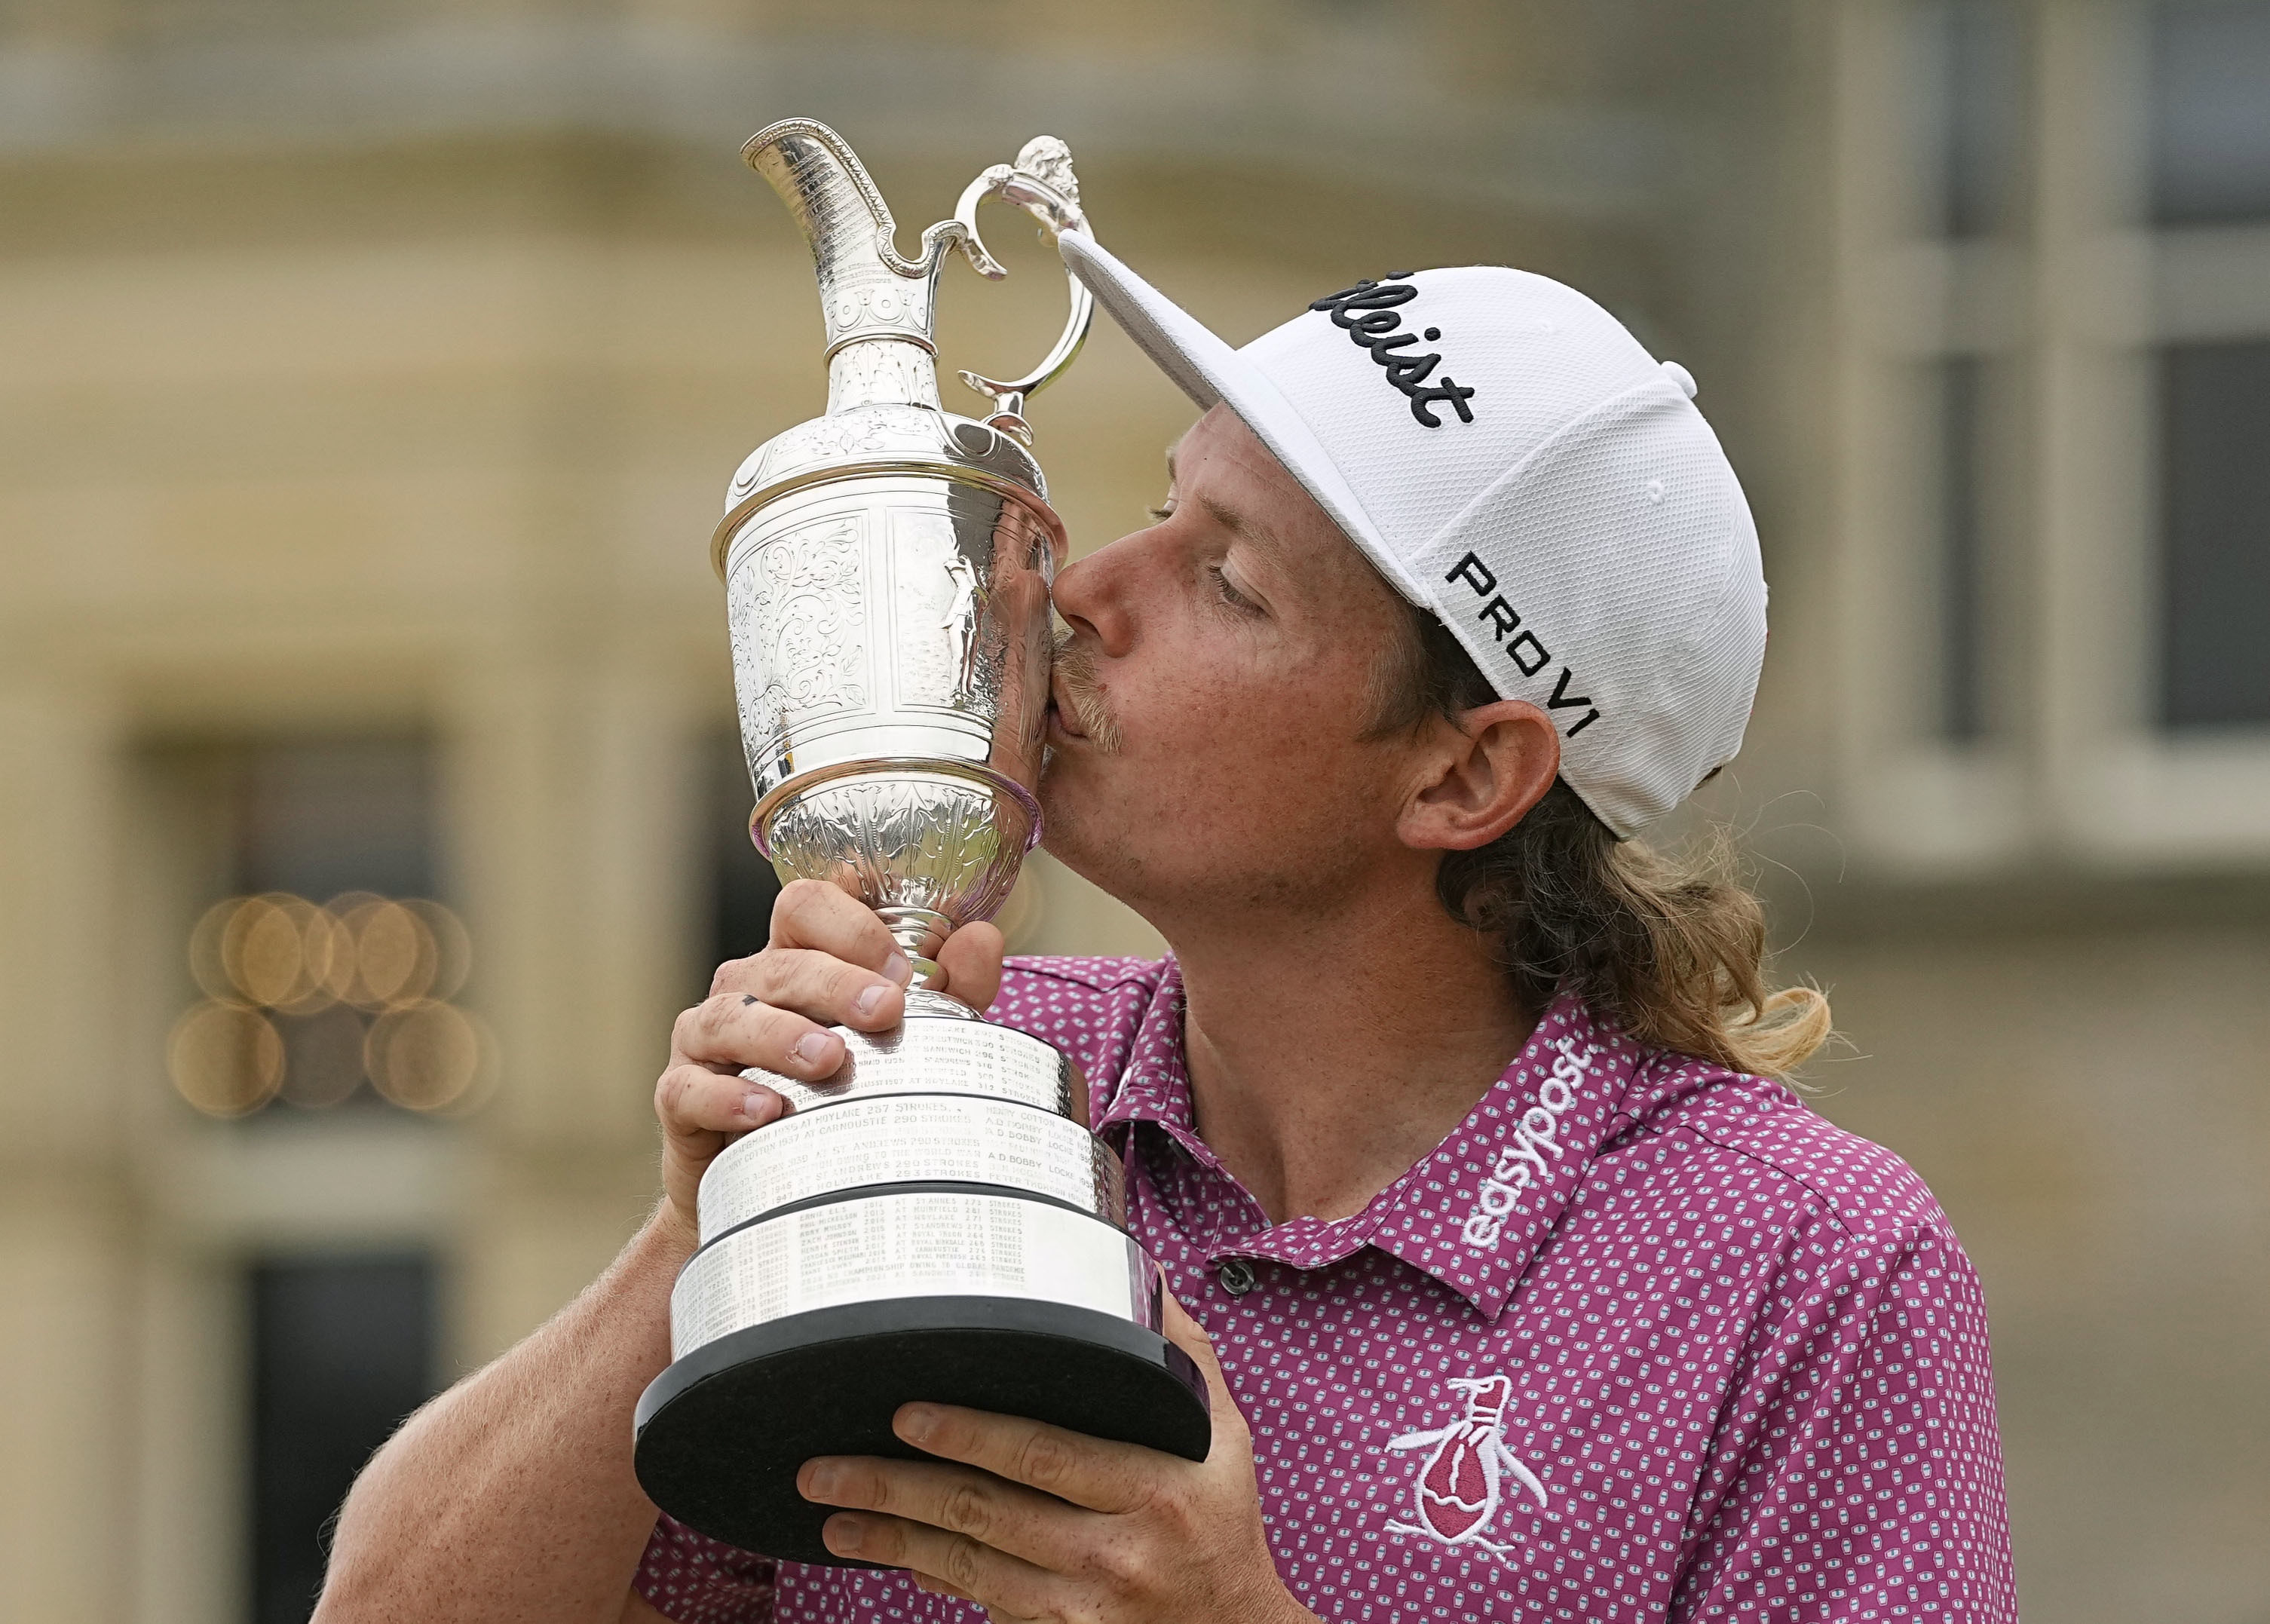 Cameron Smith of Australia kisses the victor’s trophy after winning the British Open golf championship on July 17, 2022, on the Old Course at St Andrews, Scotland. Photo: Kyodo